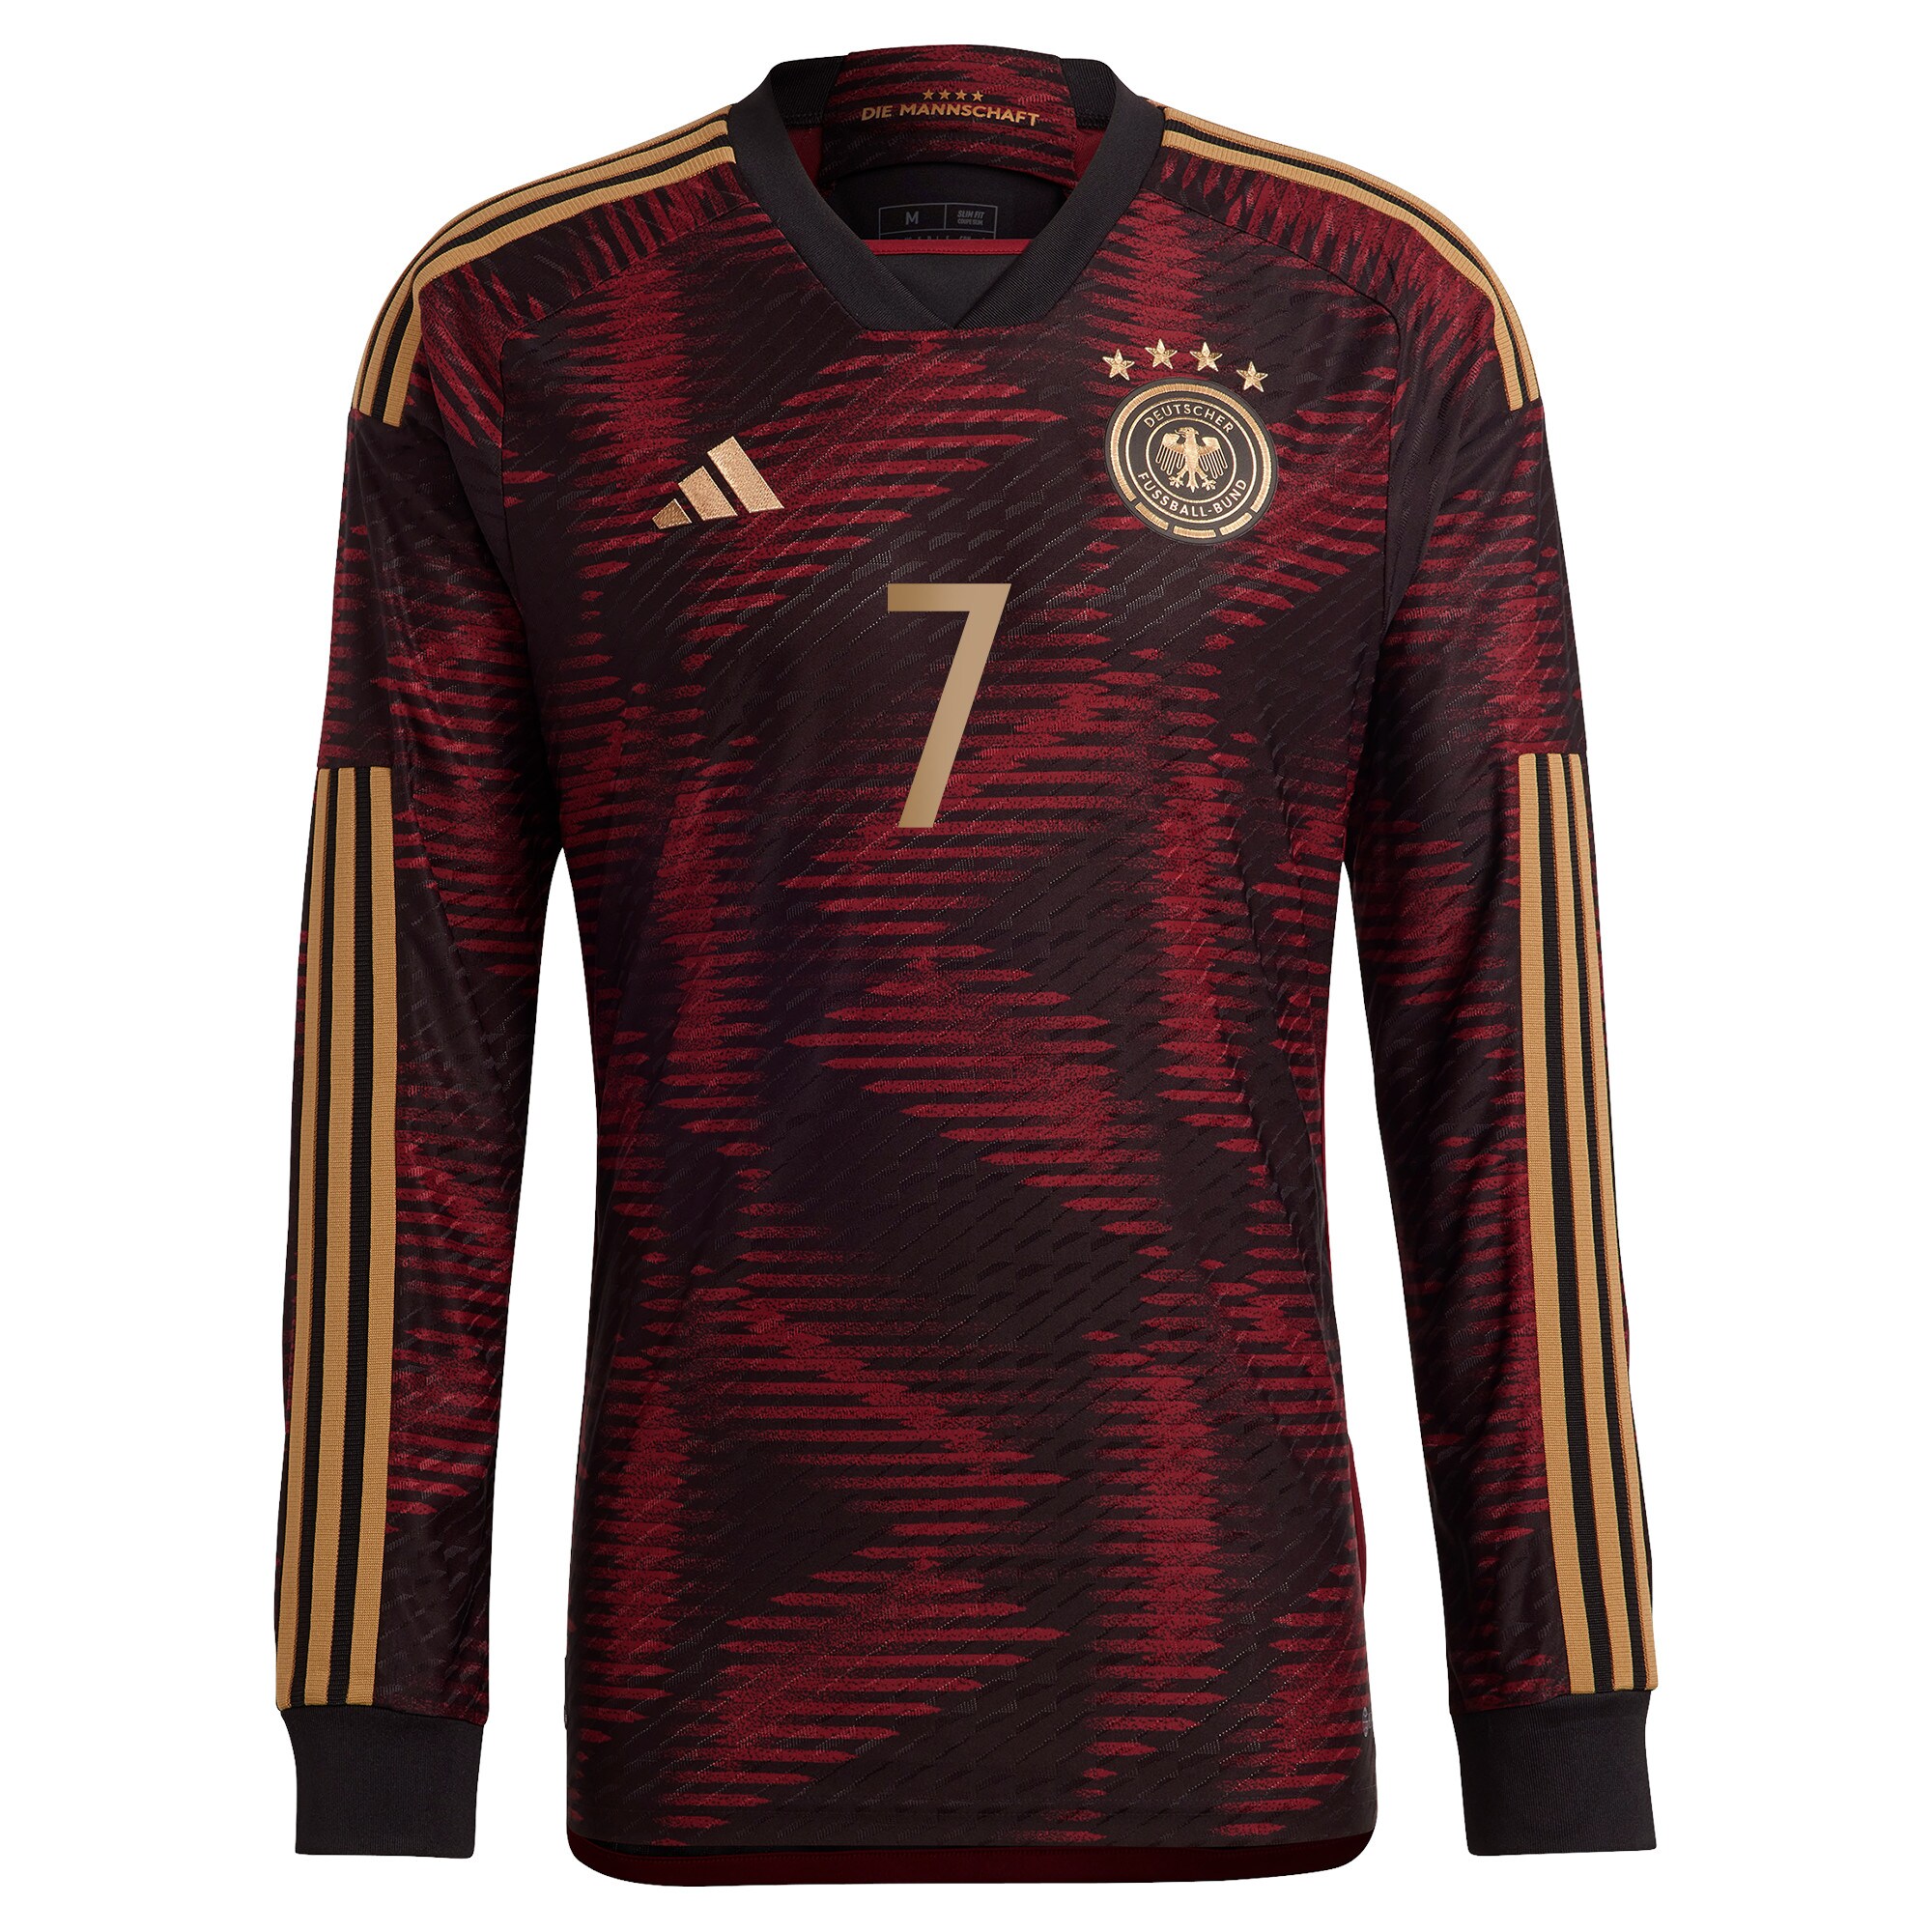 Germany Away Authentic Shirt Long Sleeve with Havertz 7 printing